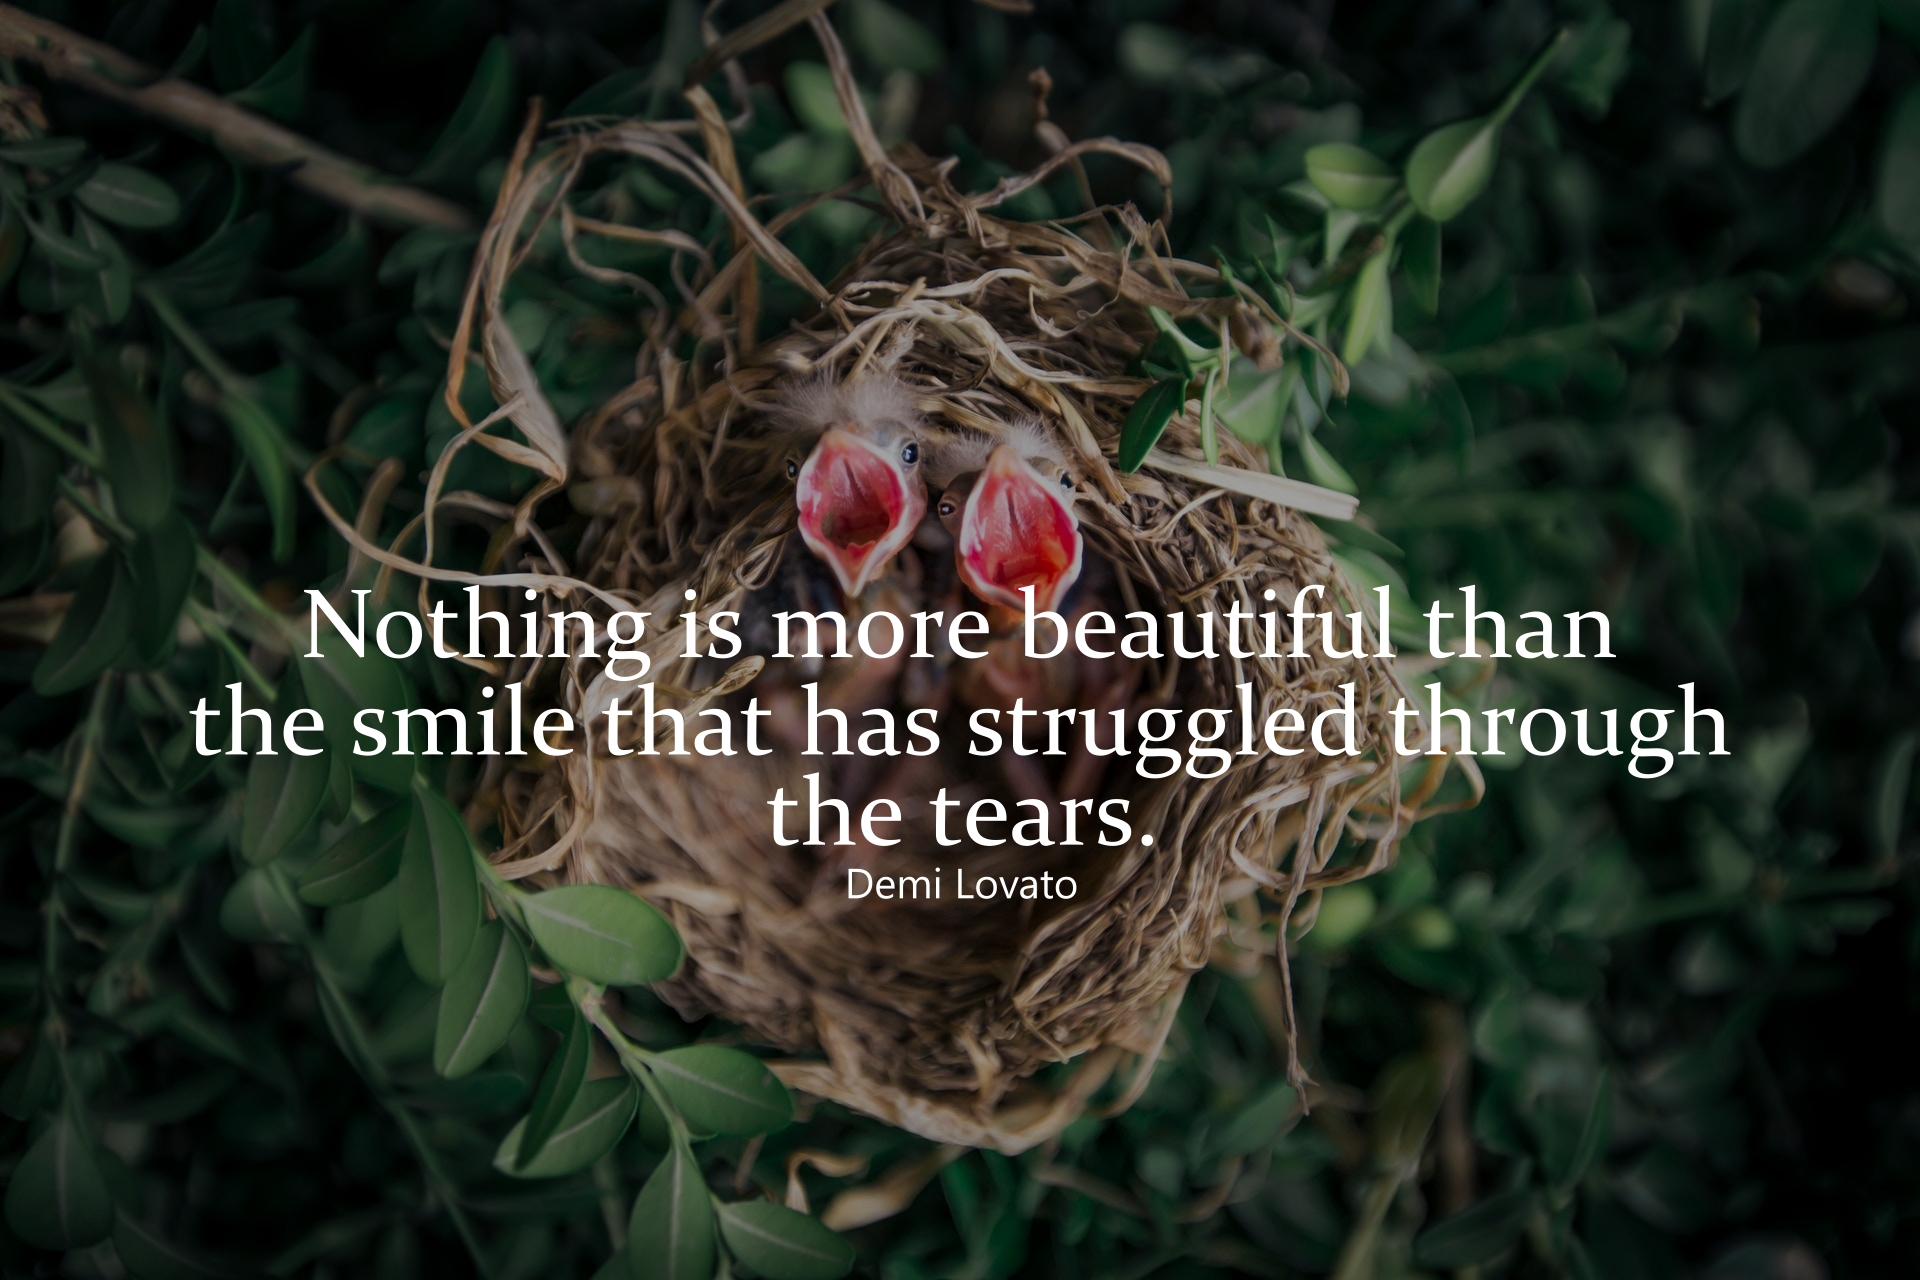 “Nothing is more beautiful than the smile that has struggled through the tears.” — Demi Lovato